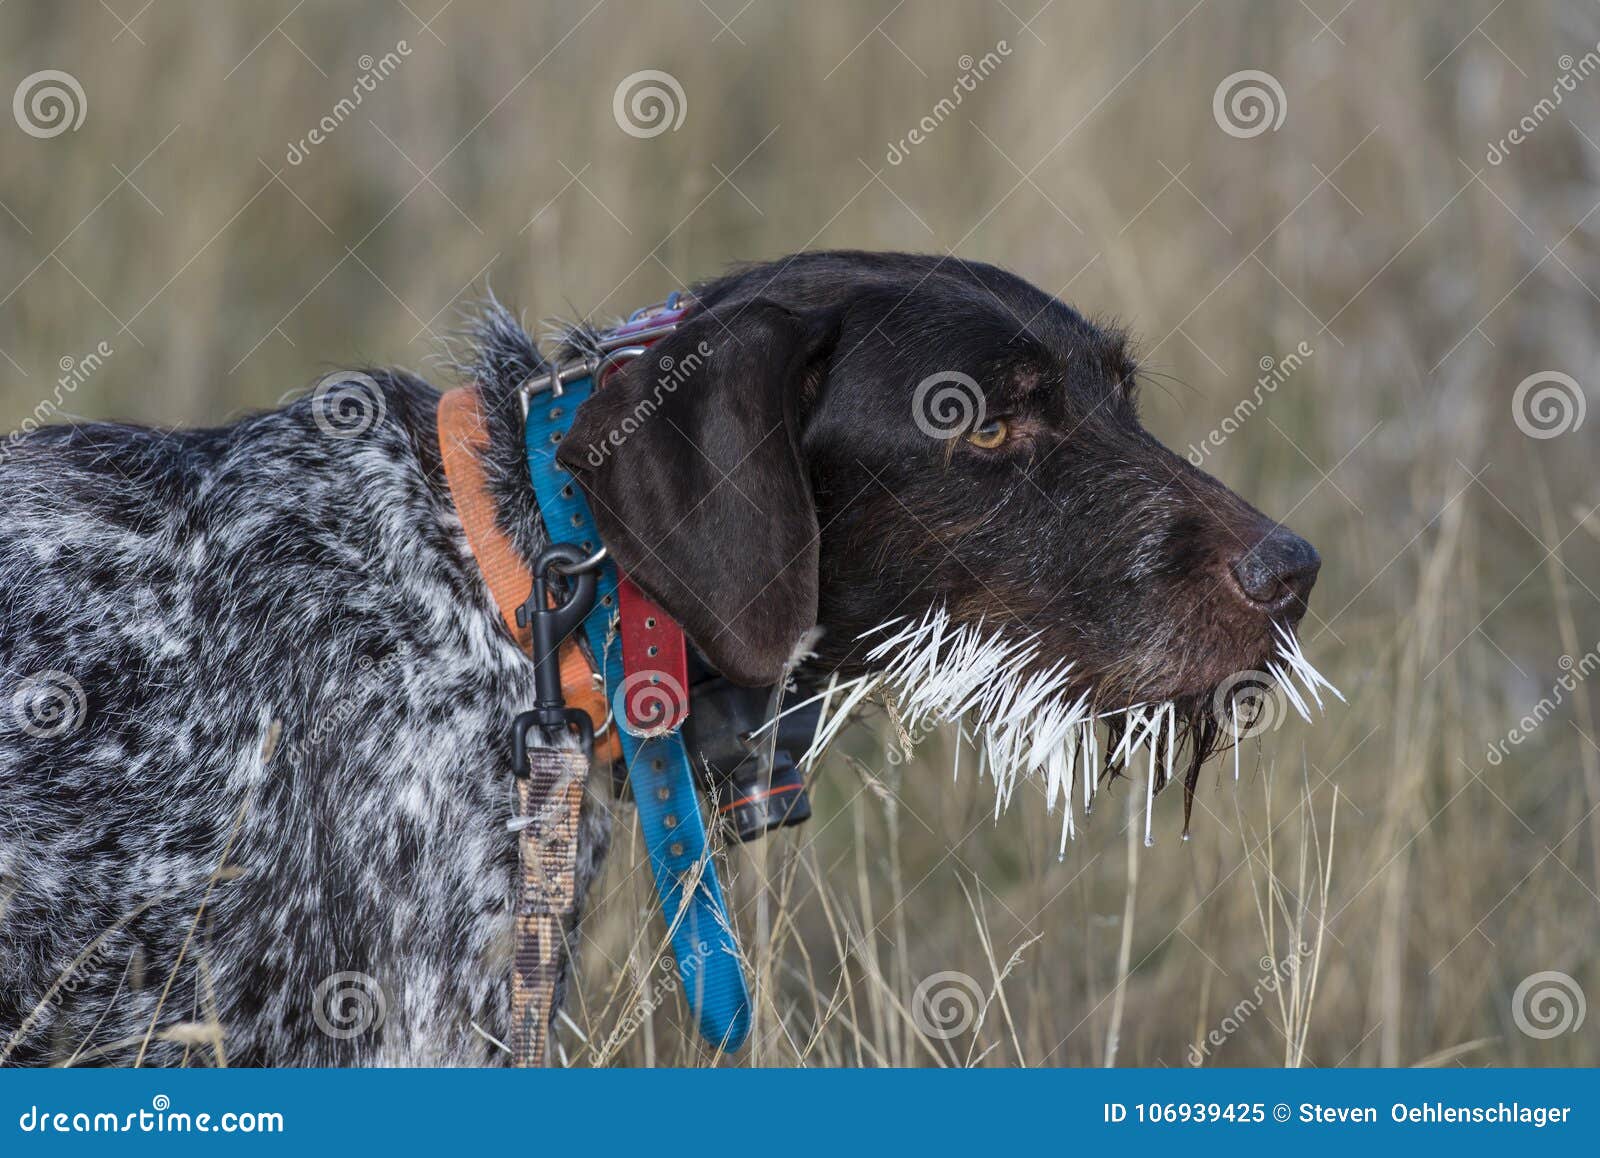 a hunting dog with a mouthful of porcupine quills